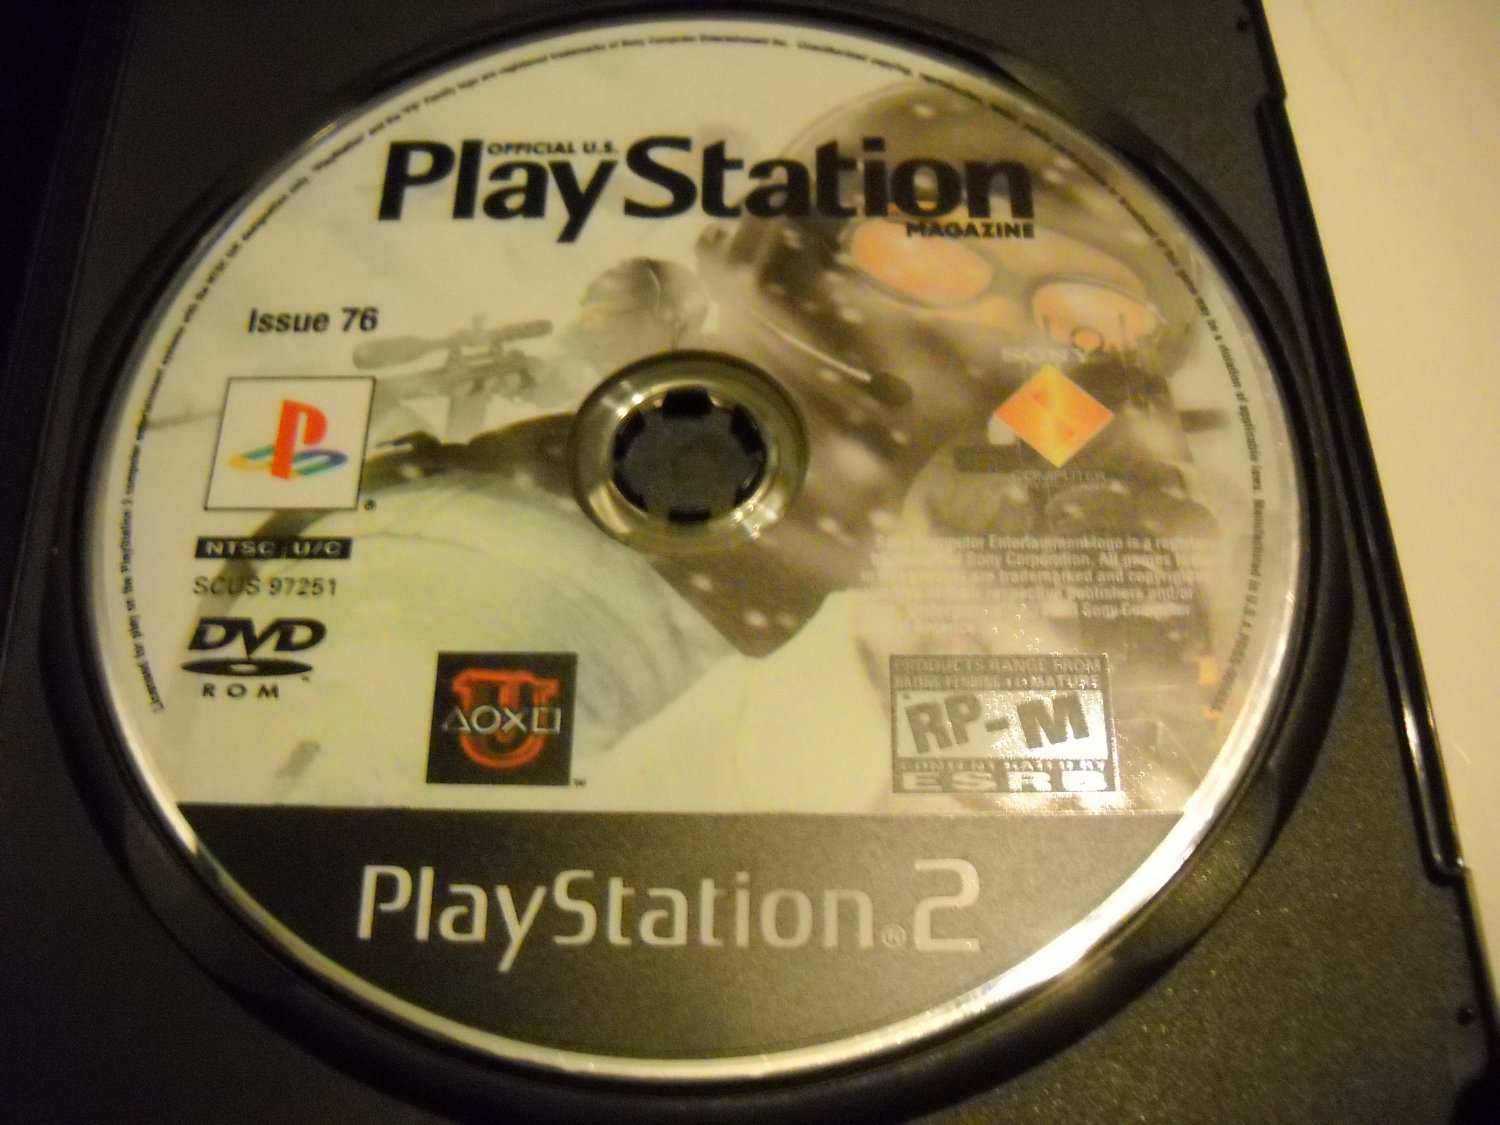 PlayStation 2 Online Gaming Demo Disc + Bonus PS2 Magazine Issue 76 Game  Disc